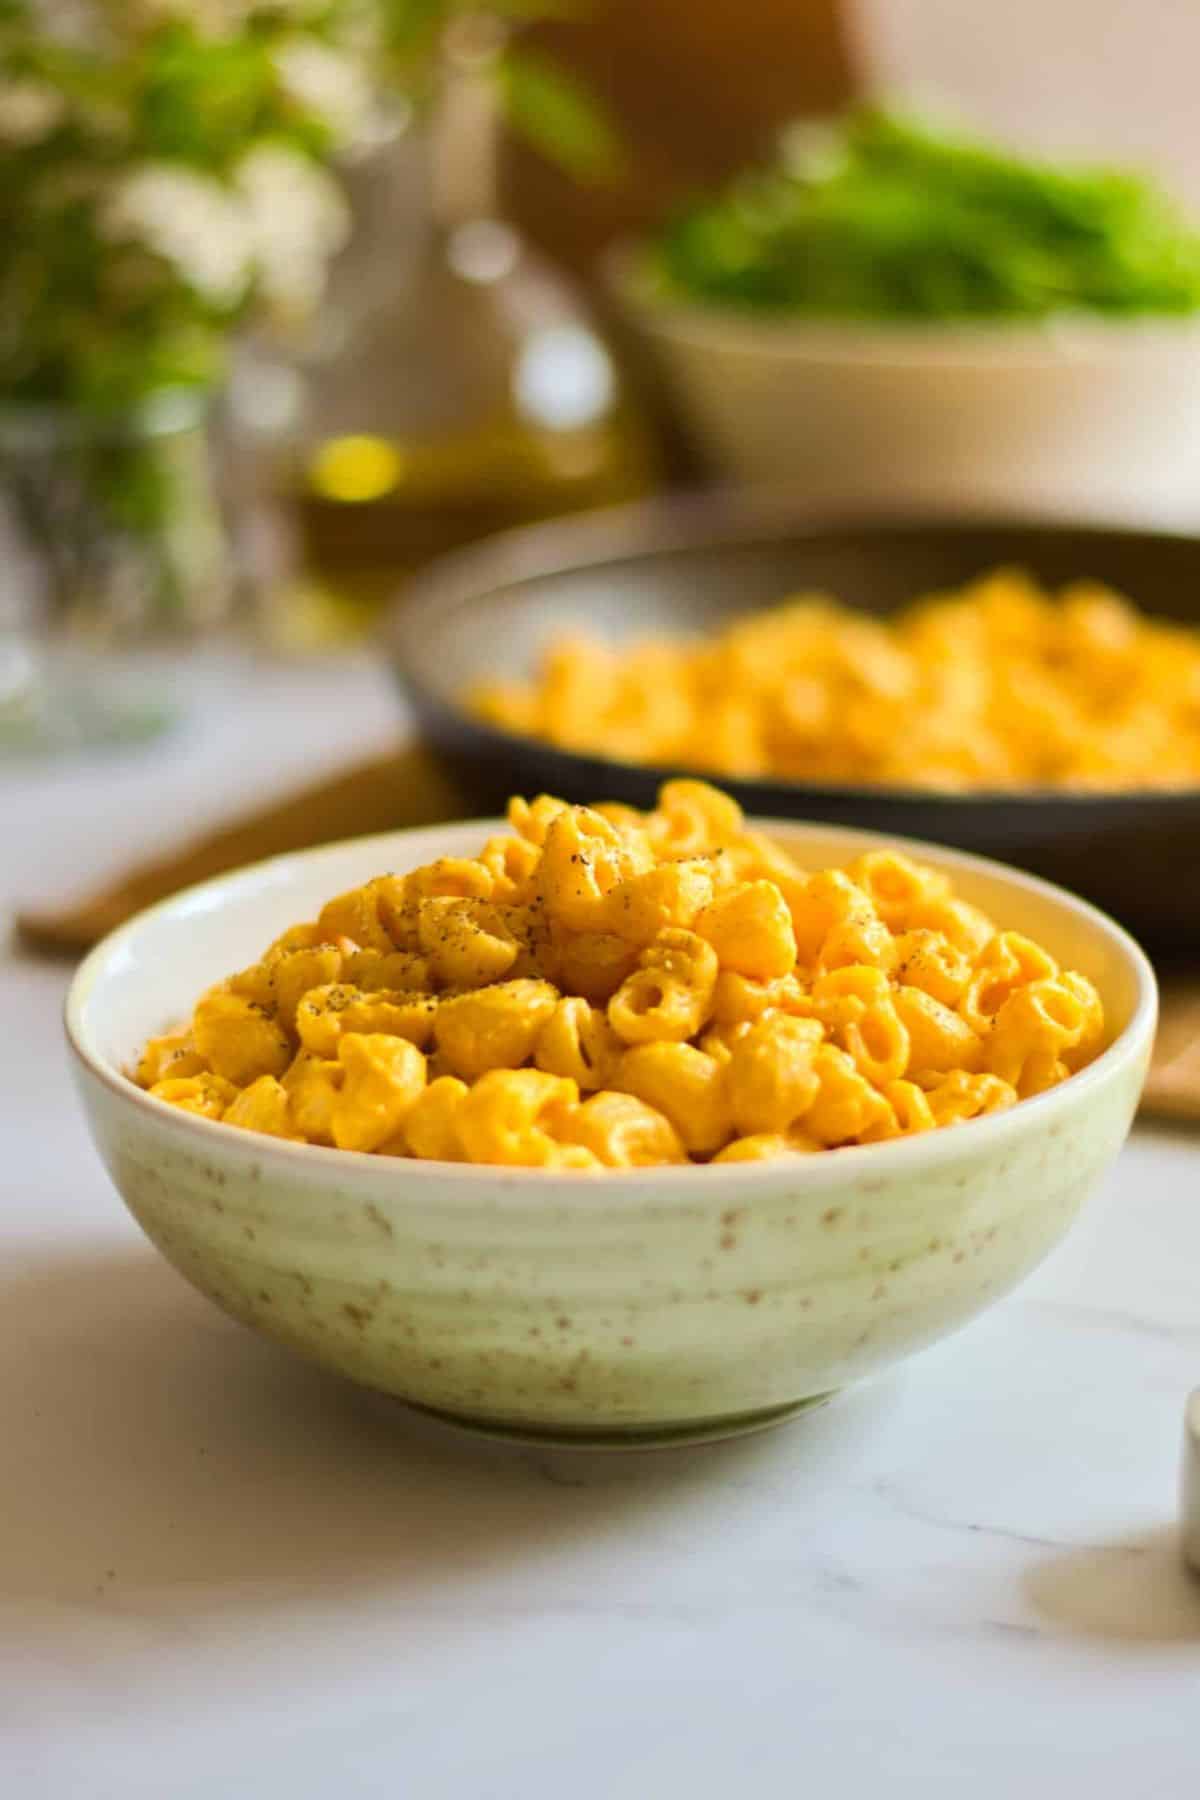 Scrumptious Gluten-Free Vegan Mac and Cheese with Potatoes and Carrots in a bowl.